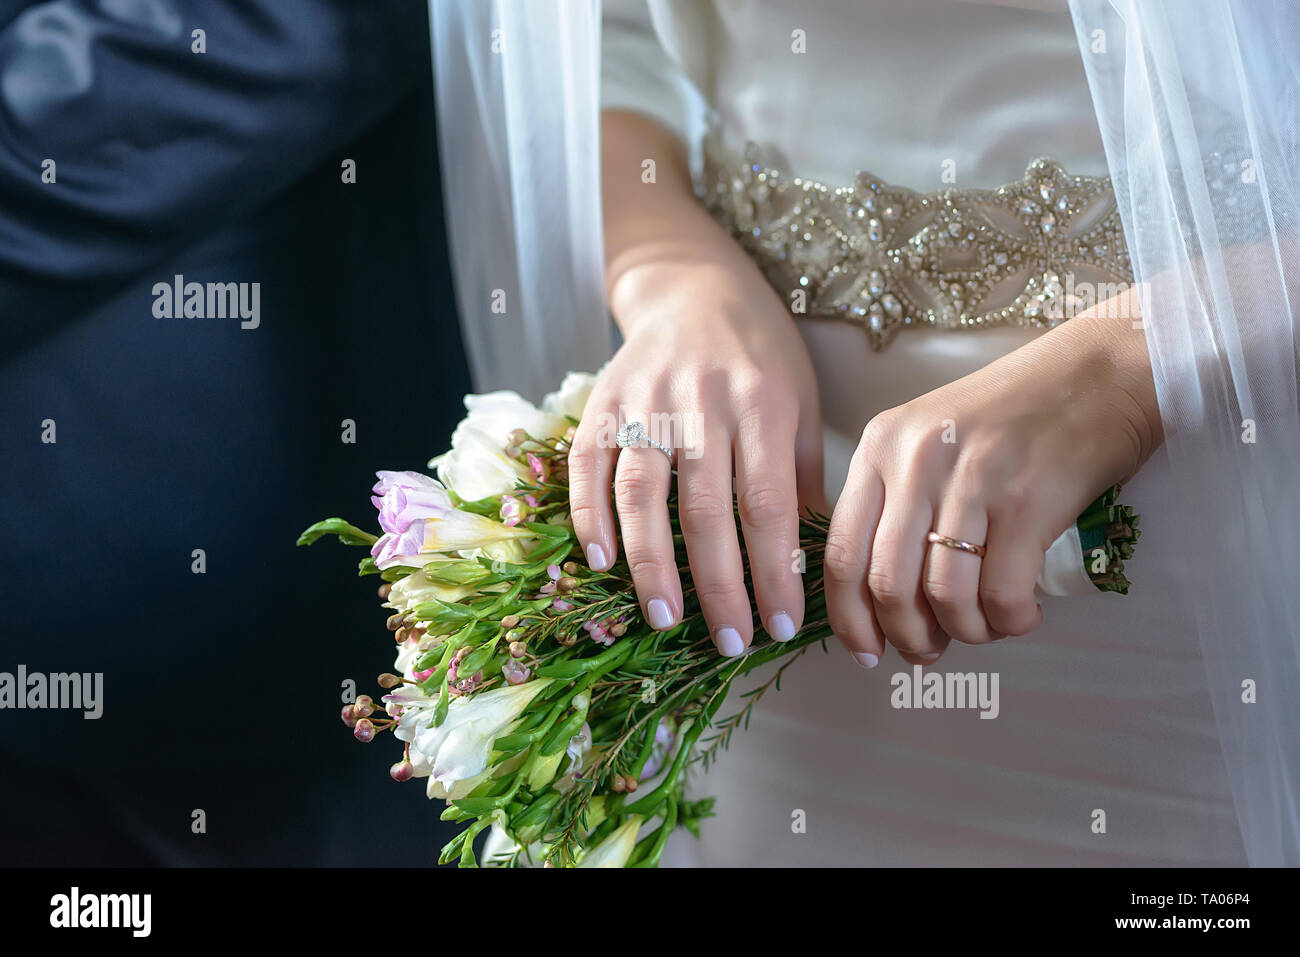 Bride and groom at the wedding with focus on bride's manicured hands with engagement ring and gold wedding band, holding a bohemian rustic bouquet Stock Photo